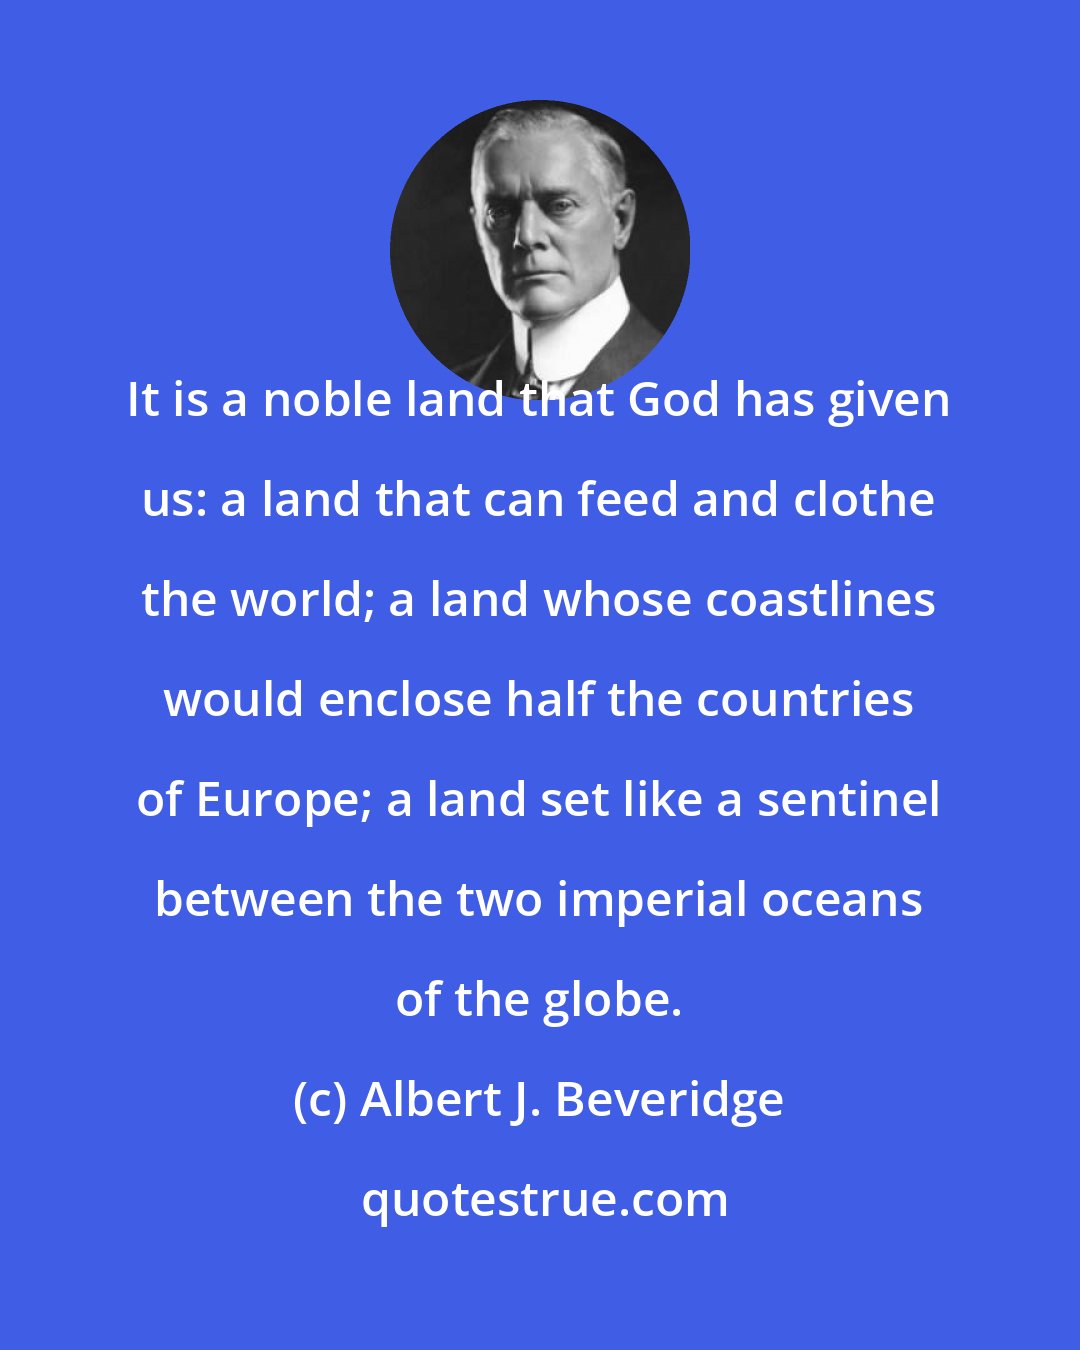 Albert J. Beveridge: It is a noble land that God has given us: a land that can feed and clothe the world; a land whose coastlines would enclose half the countries of Europe; a land set like a sentinel between the two imperial oceans of the globe.